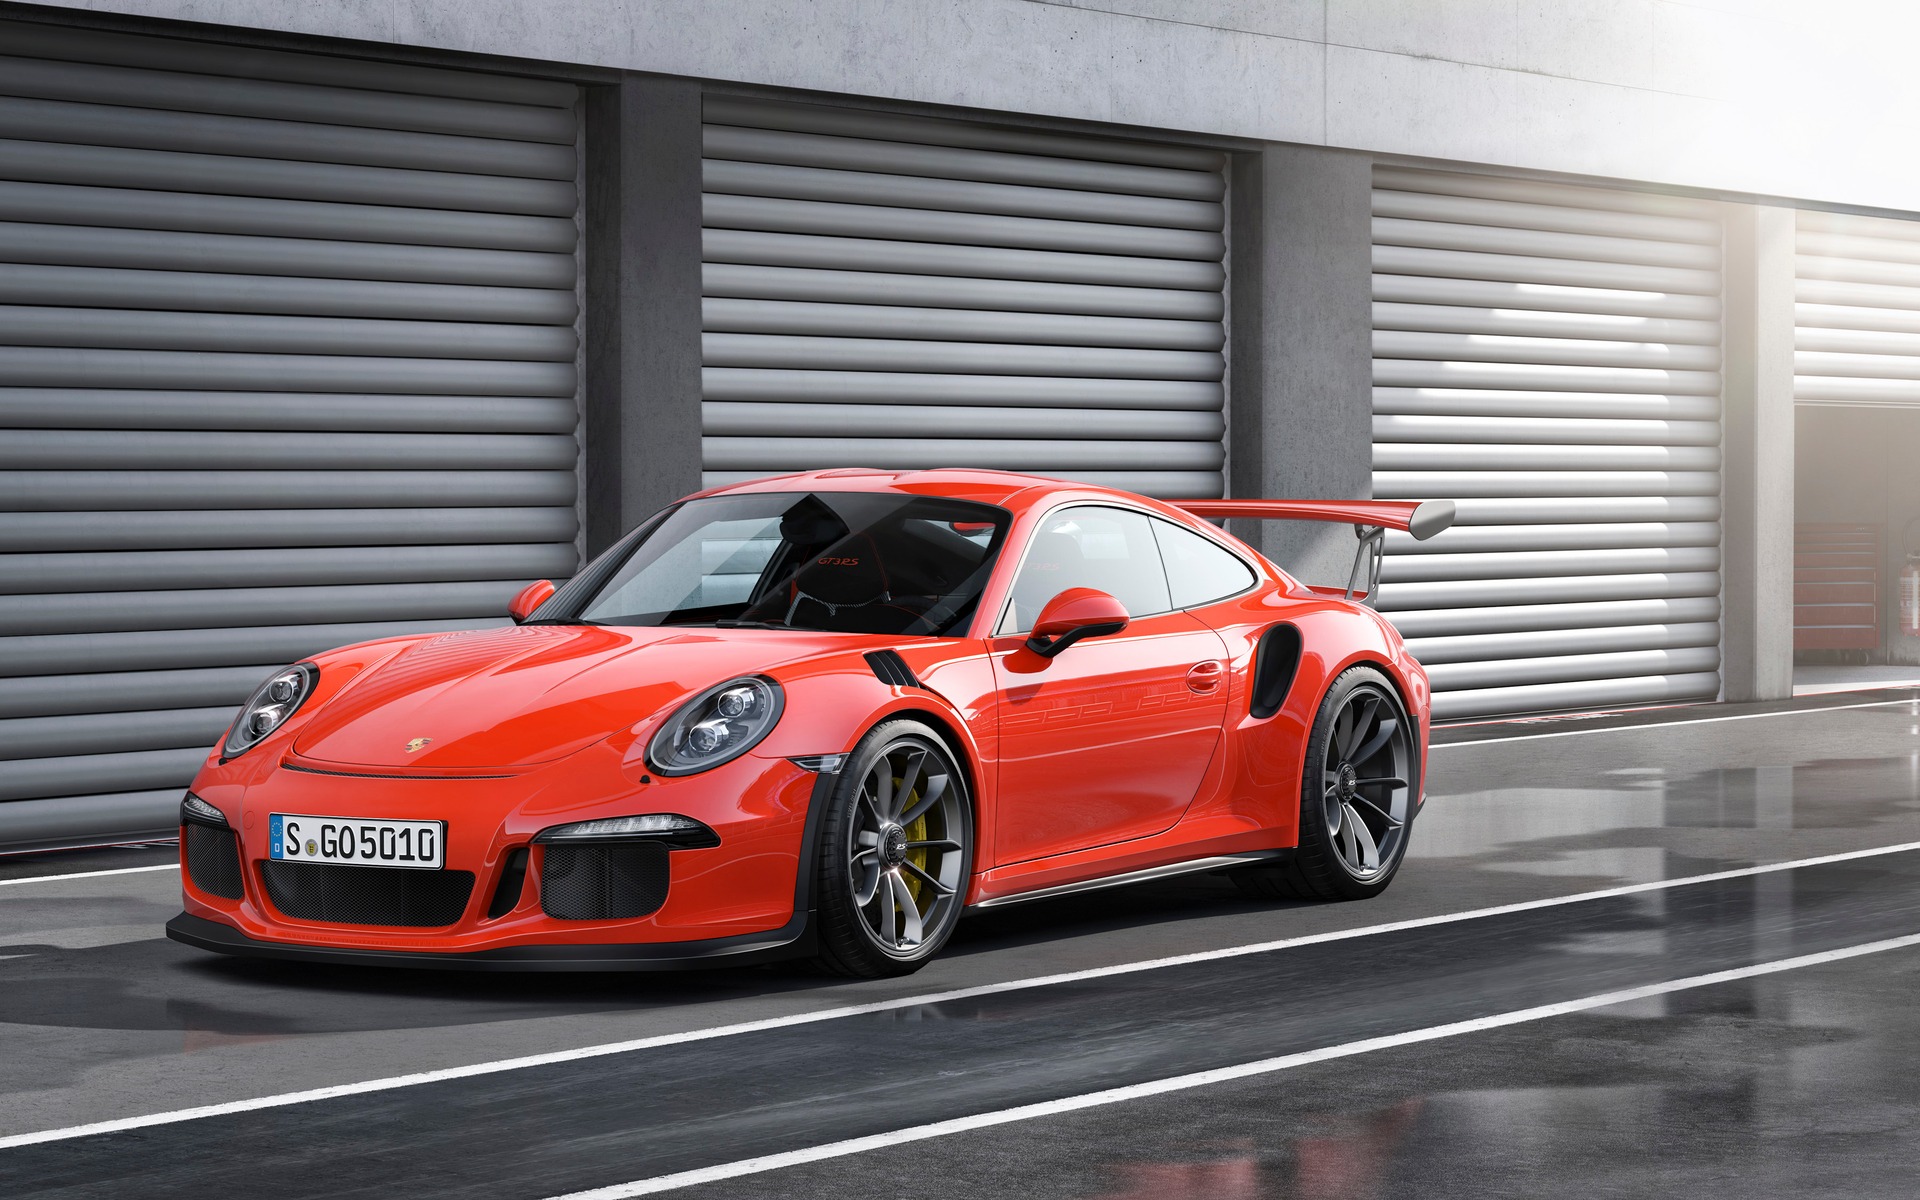 The 911 GT3 RS is the top performer among all 911s.